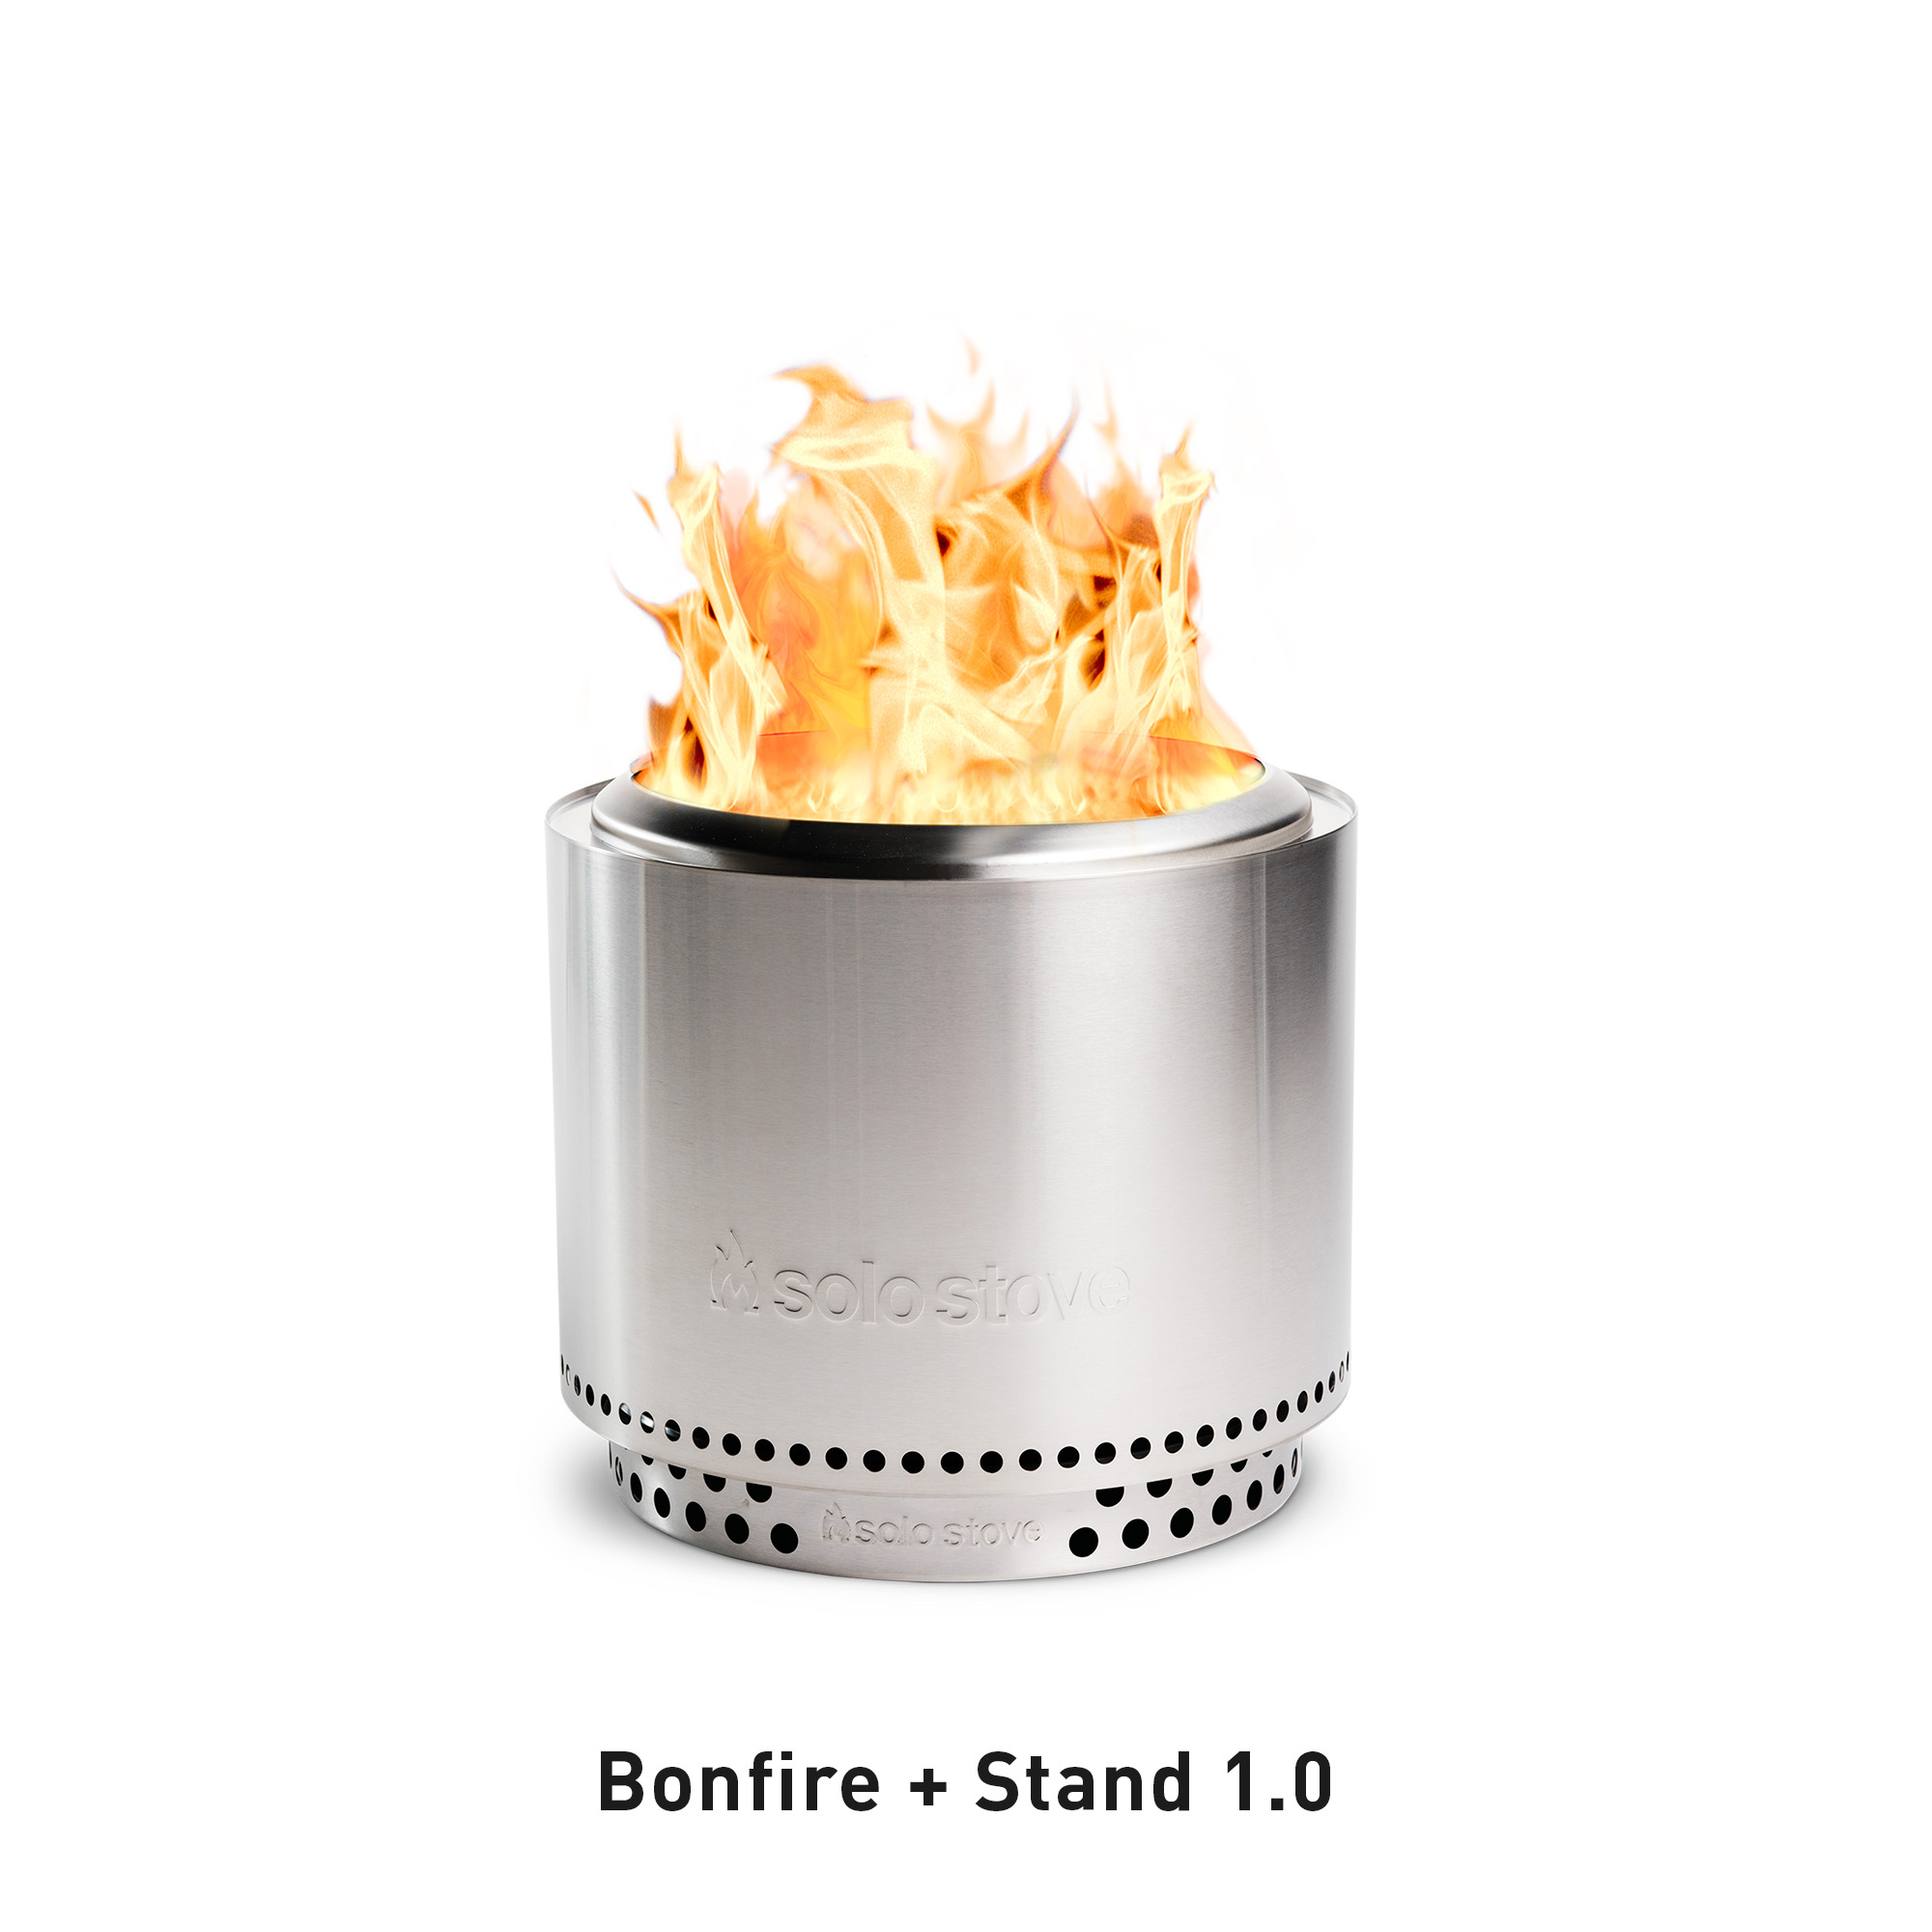 Solo Stove Bonfire 19.5 in. x 14 in. Round Stainless Steel Bundle Wood  Burning Backyard Fire Pit with Stand Included, Stainless Steel/Silver